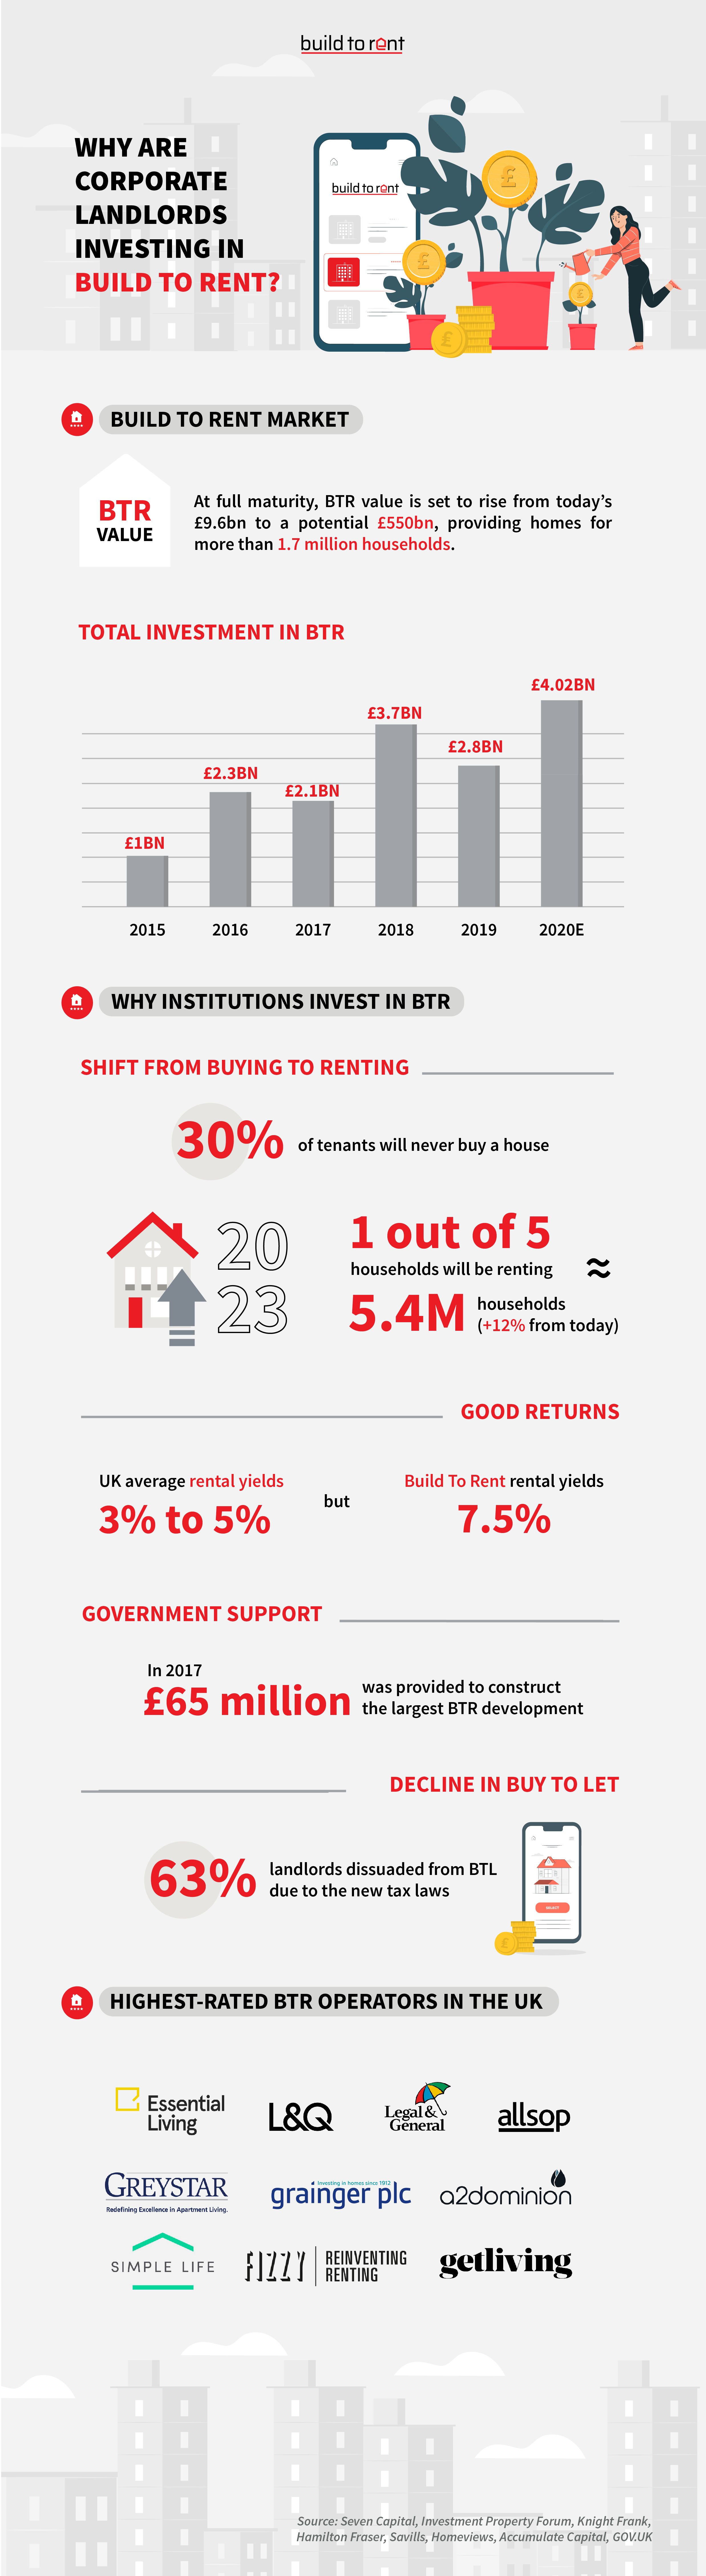 Why Are Corporate Landlords Investing in Build To Rent?